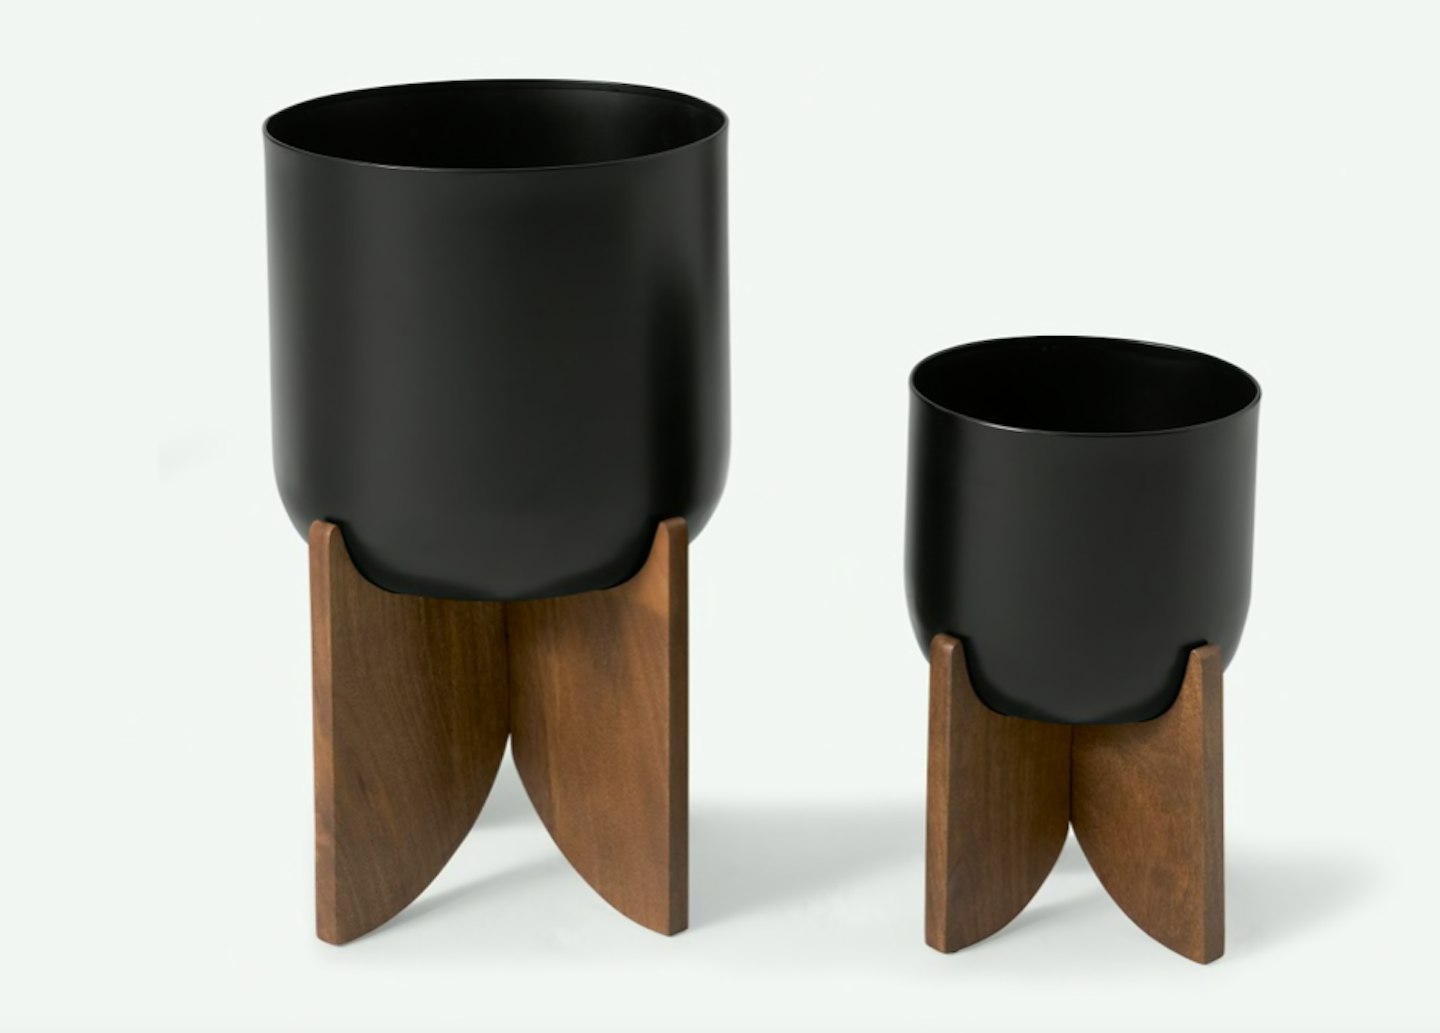 MADE, Kofi Set of 2 Sculpted Planters with Stands, Black & Dark Stain Mango Wood, WAS £140 NOW £98